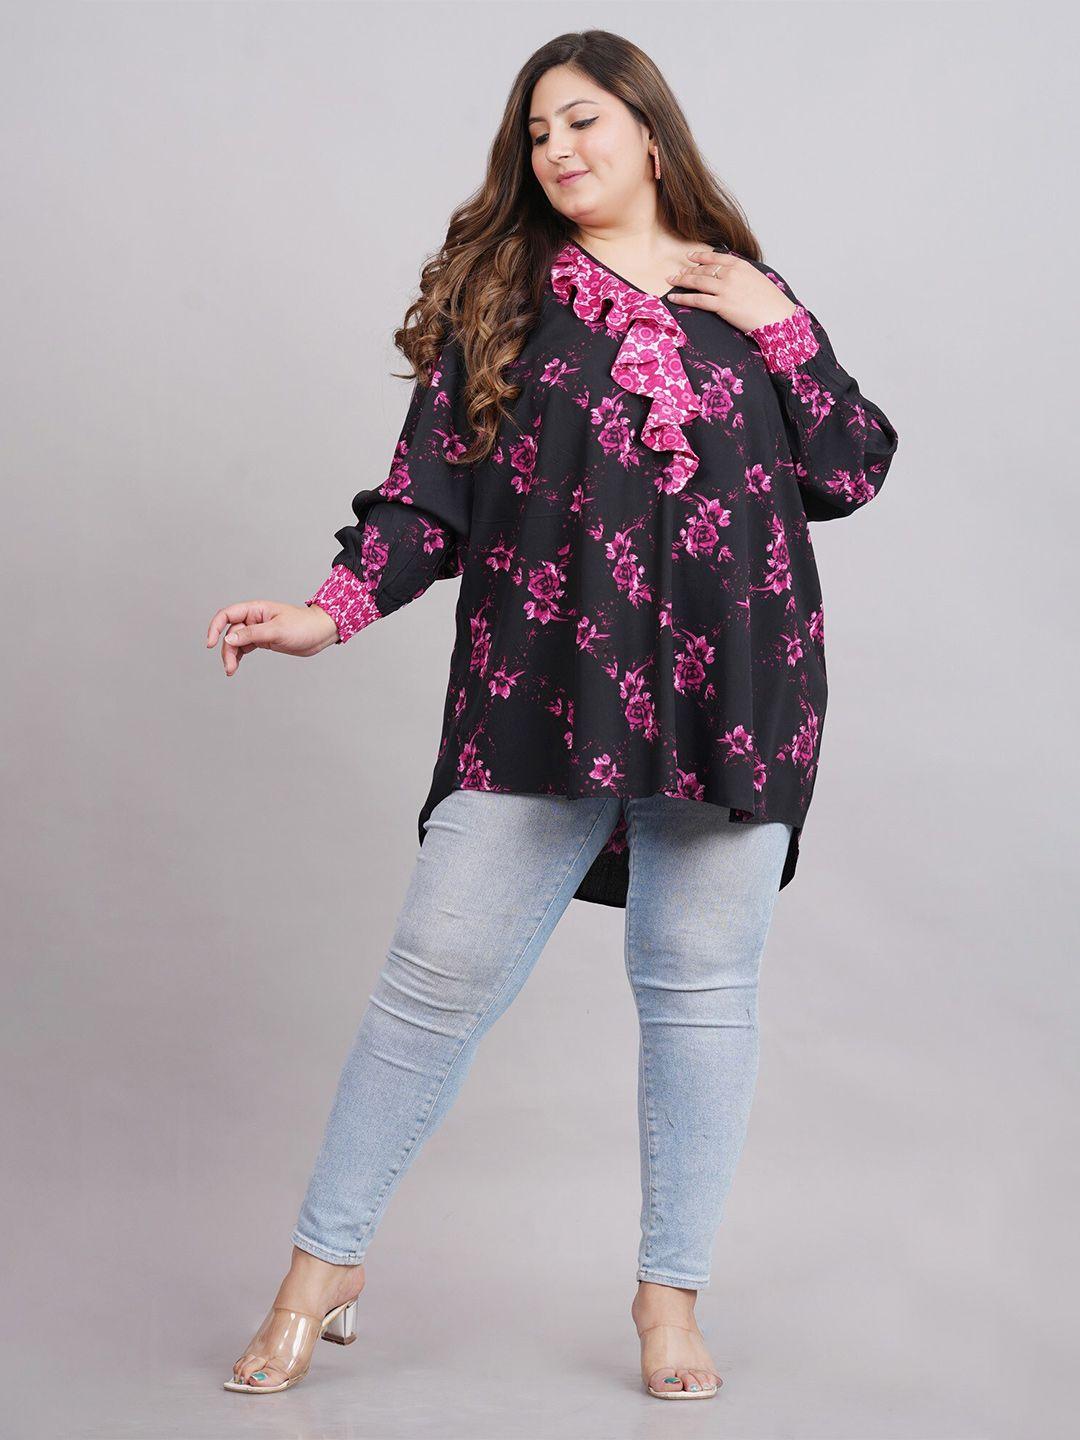 here&now plus size floral printed v neck shirt style top